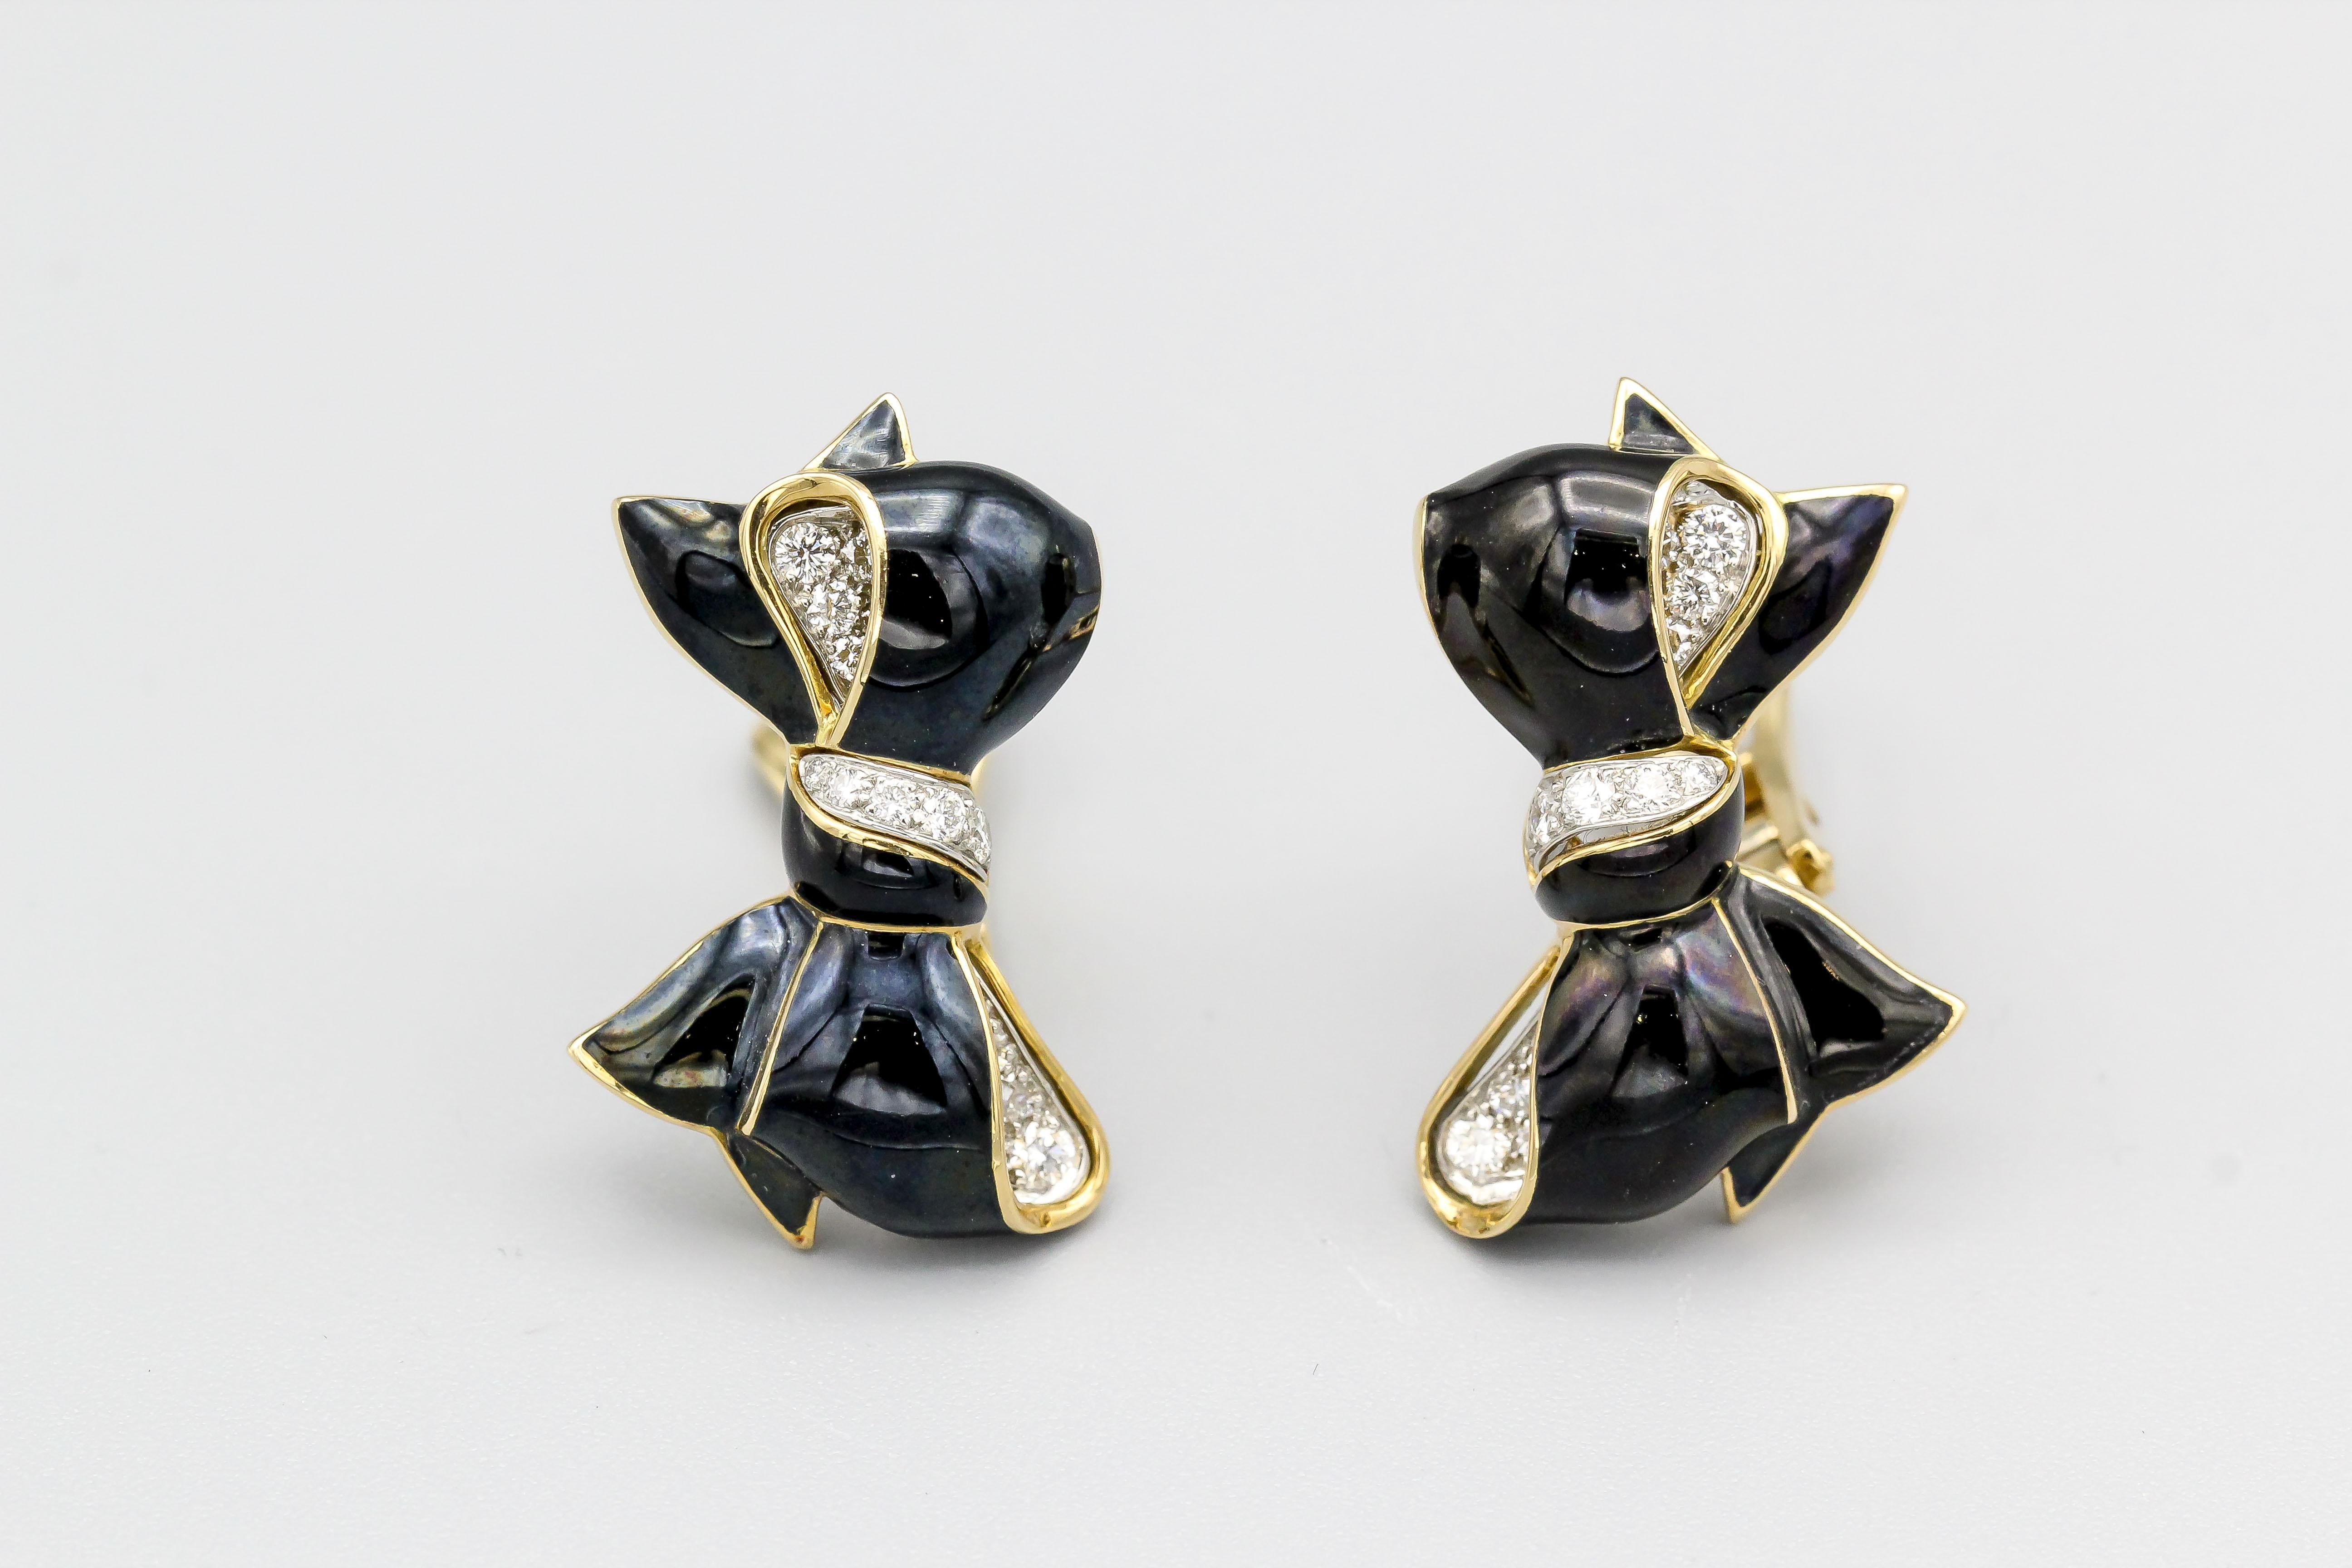 Introducing the Verdura Diamond Enamel and 18 Karat Yellow Gold Platinum Bow Earrings—a masterpiece of elegance and sophistication that encapsulates the timeless charm and artistic brilliance of the renowned jeweler, Verdura.

These exquisite